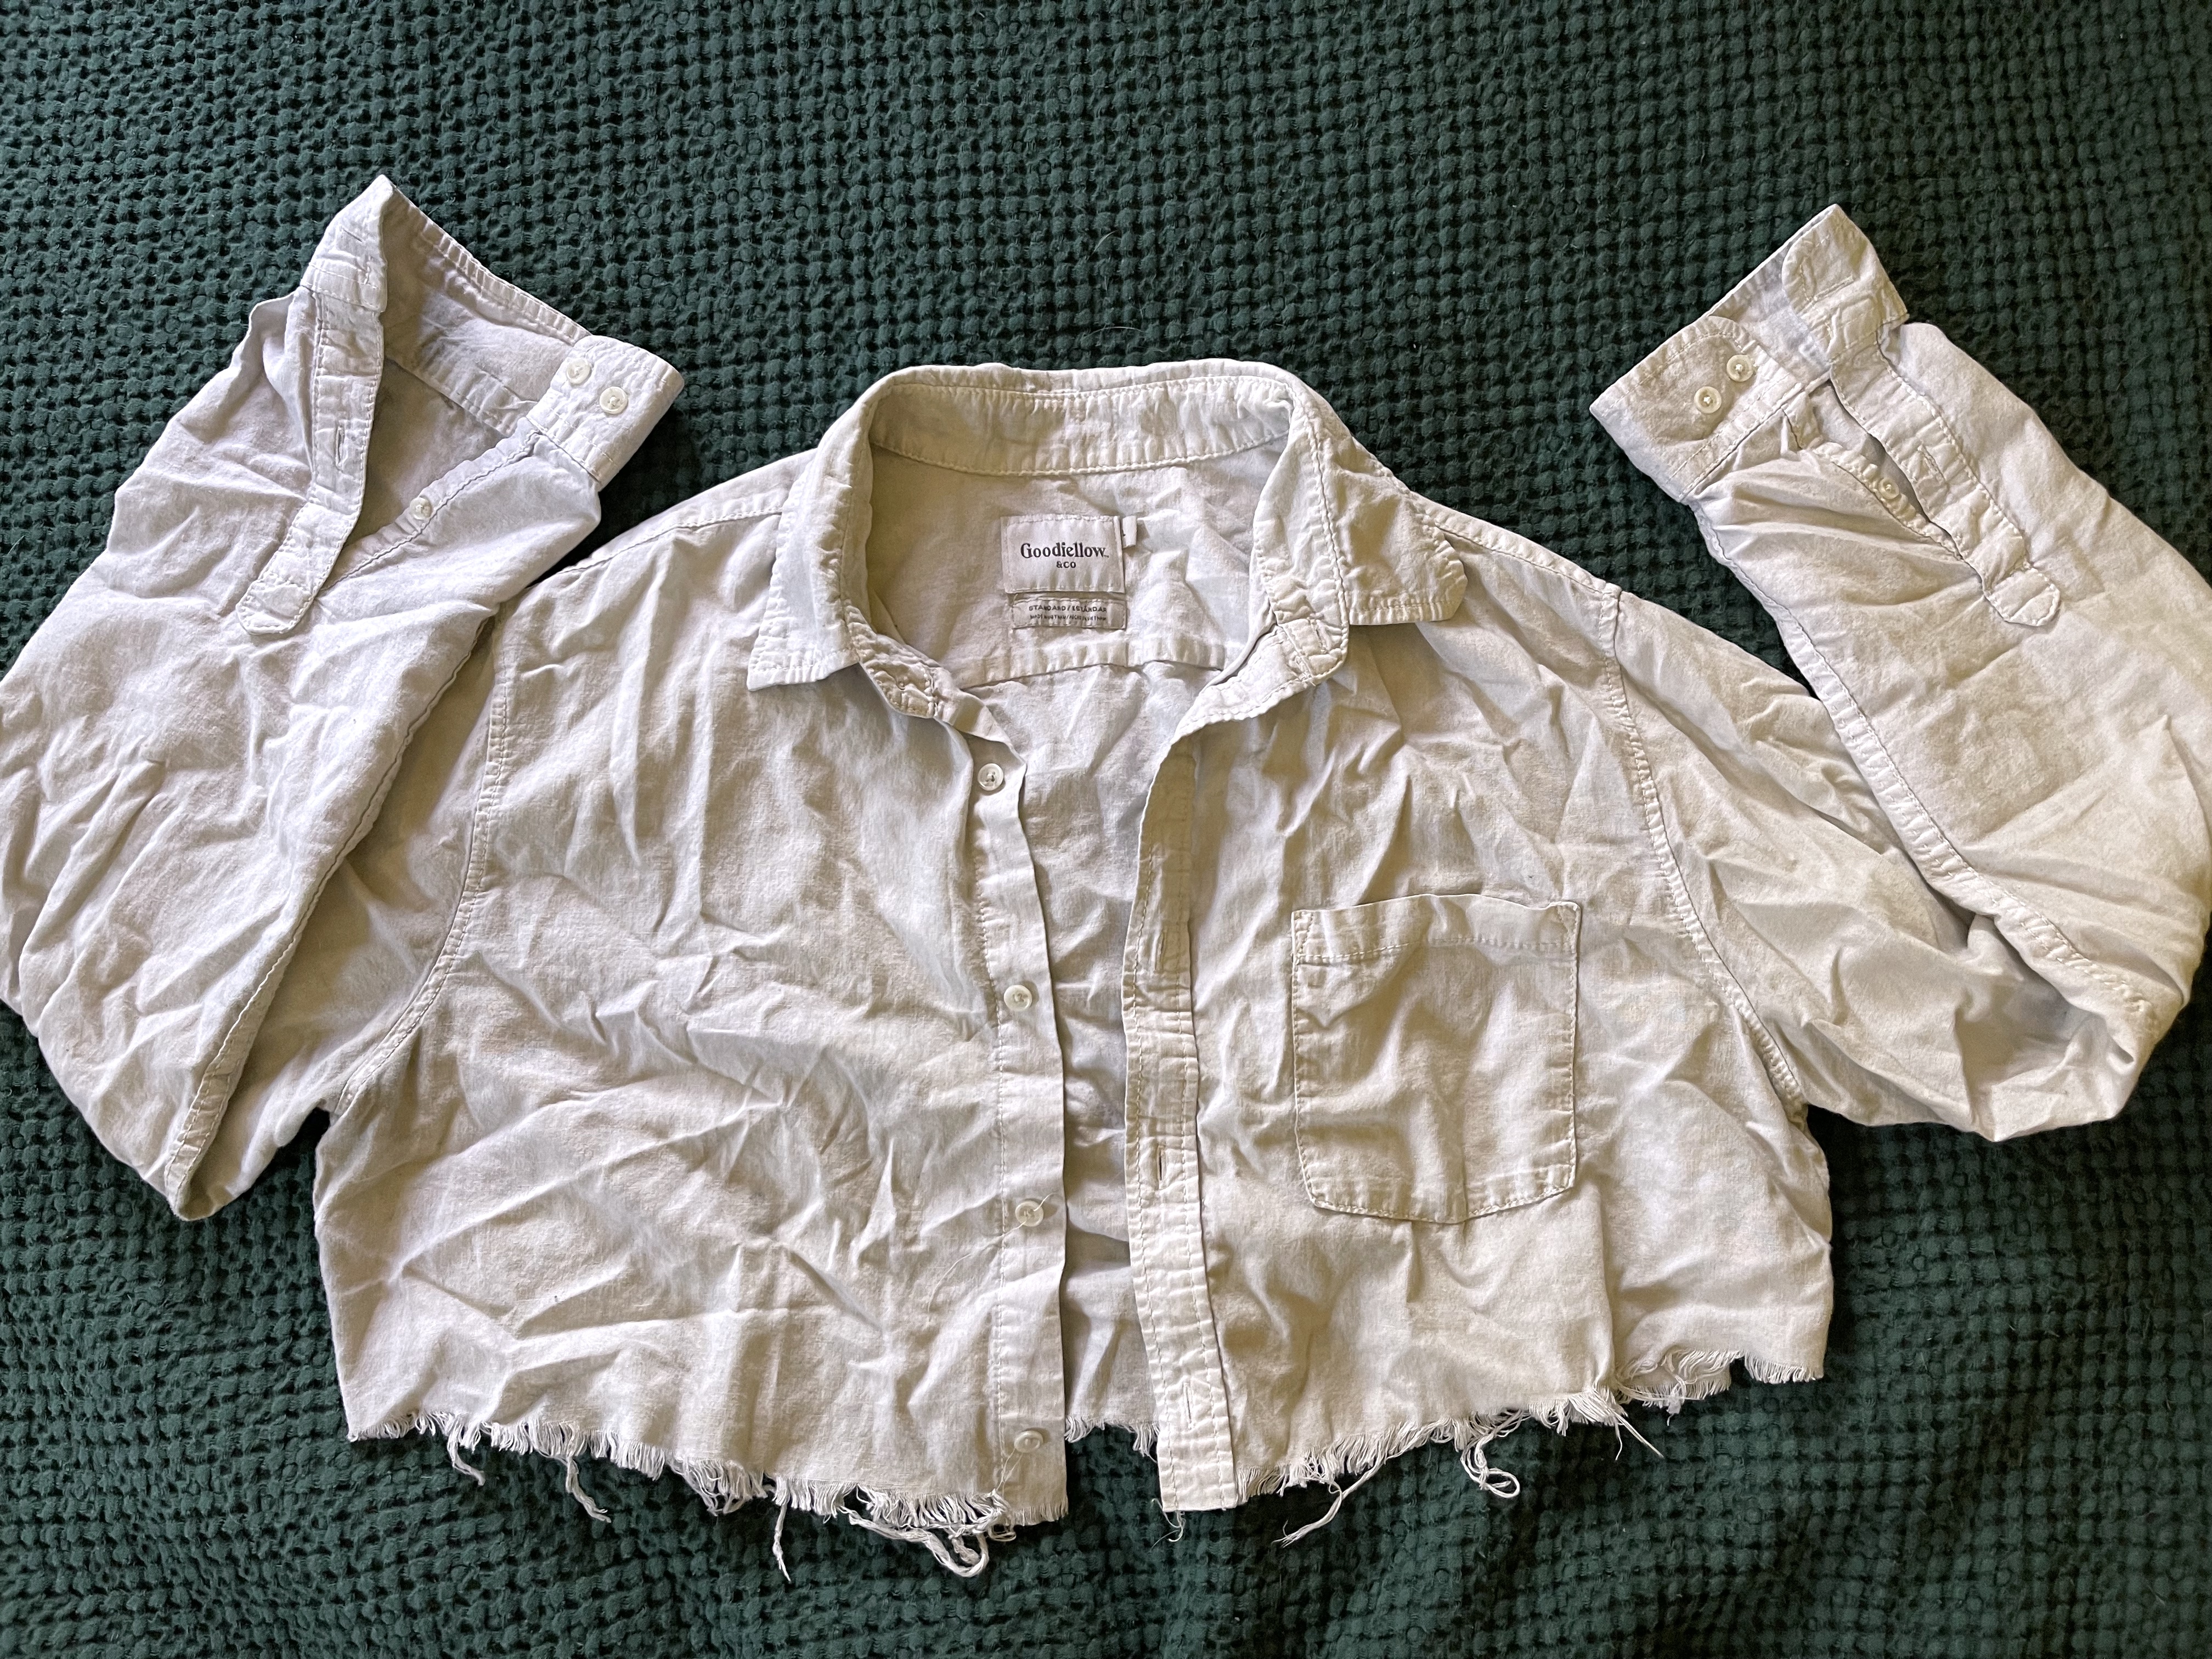 a cotton shirt before being laundry stripped.